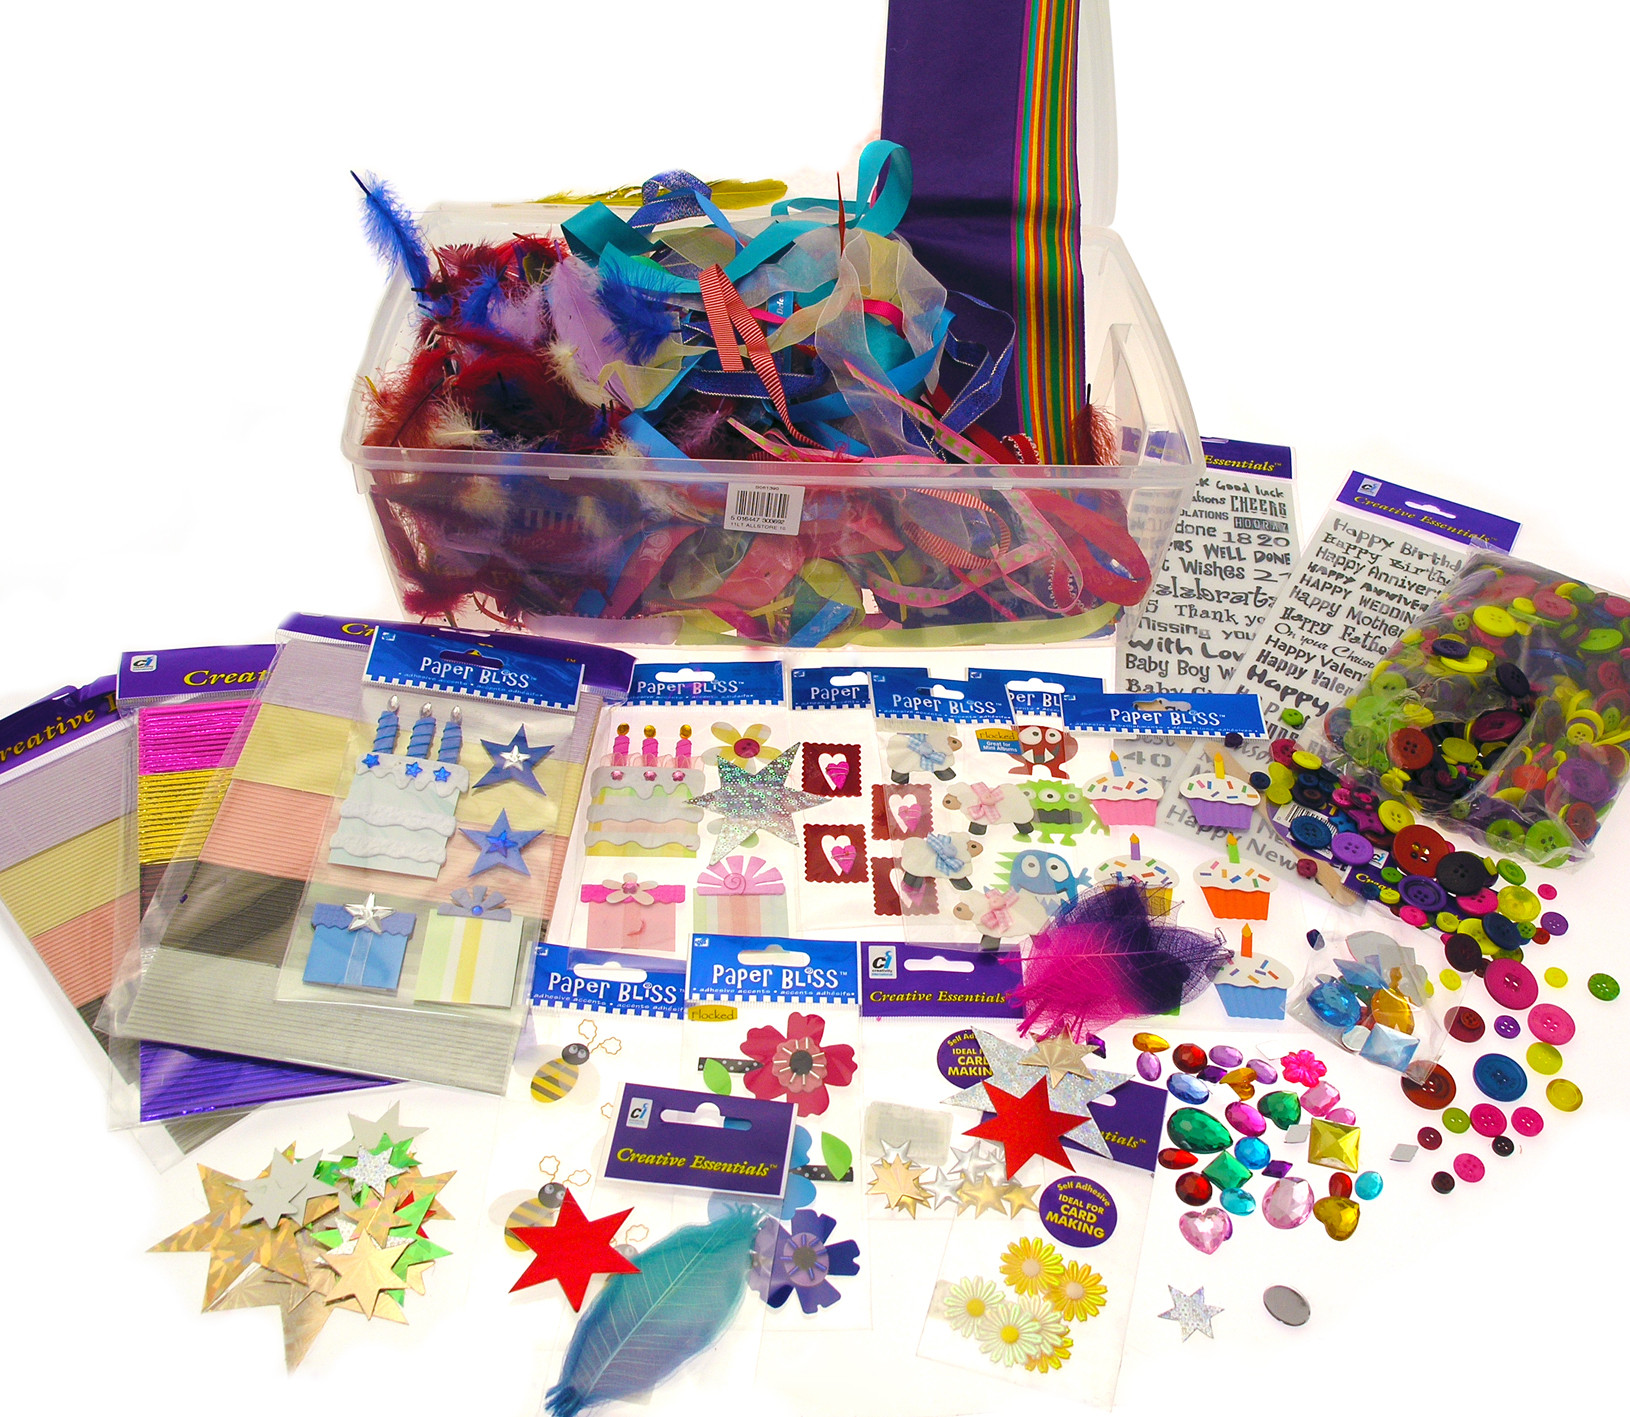 Craft Kit For Kids
 Bumper craft kits ideal for a crafty kids party